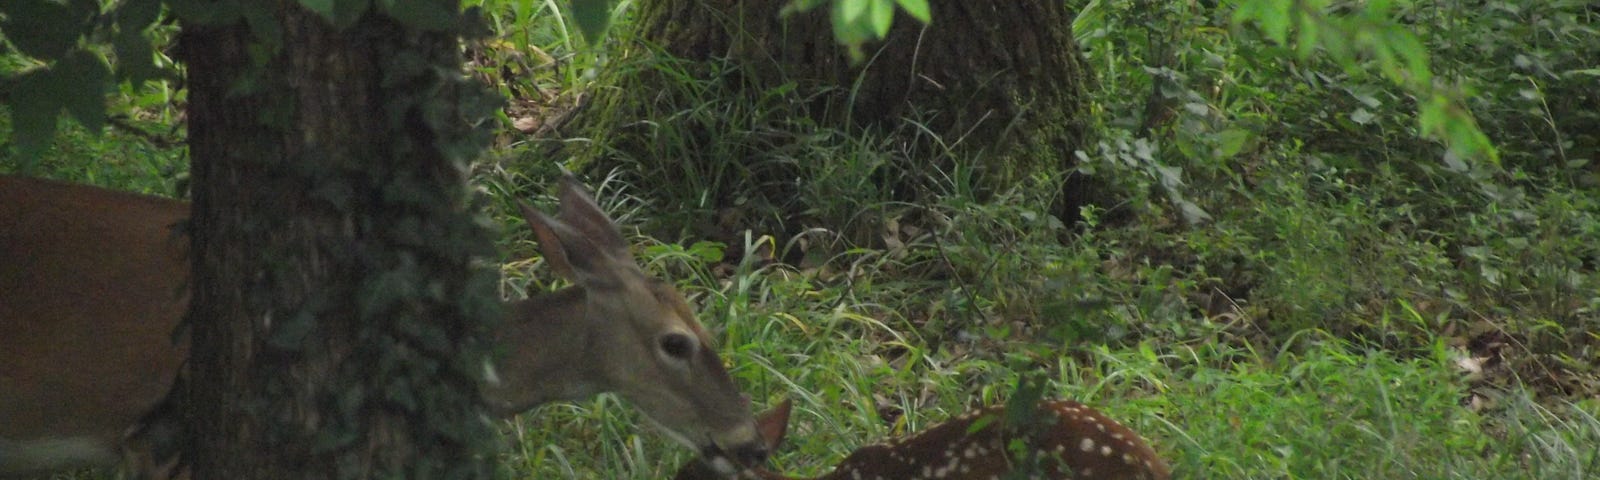 Doe and fawn in greenery/trees. Does nose is above the fawn’s head.